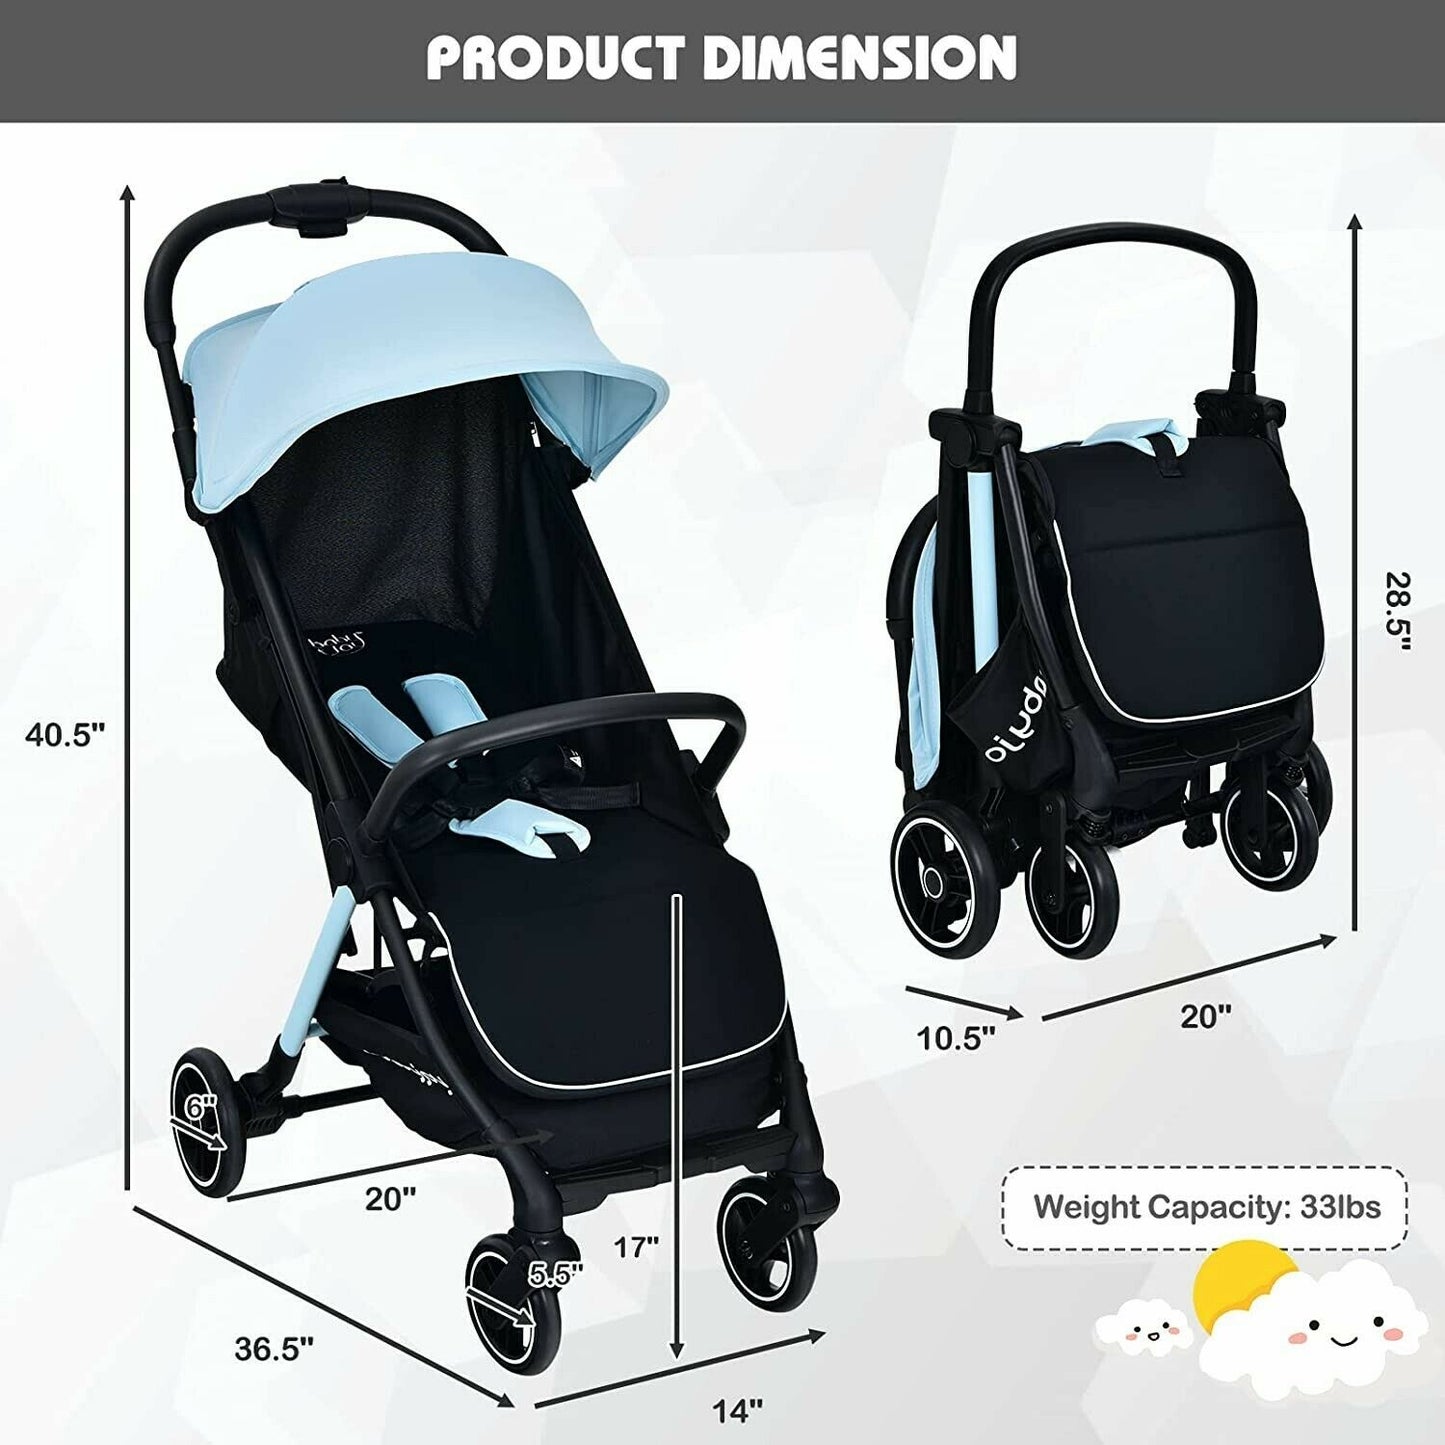 Lightweight Baby Stroller Foldable Compact Travel Stroller for Airplane - New